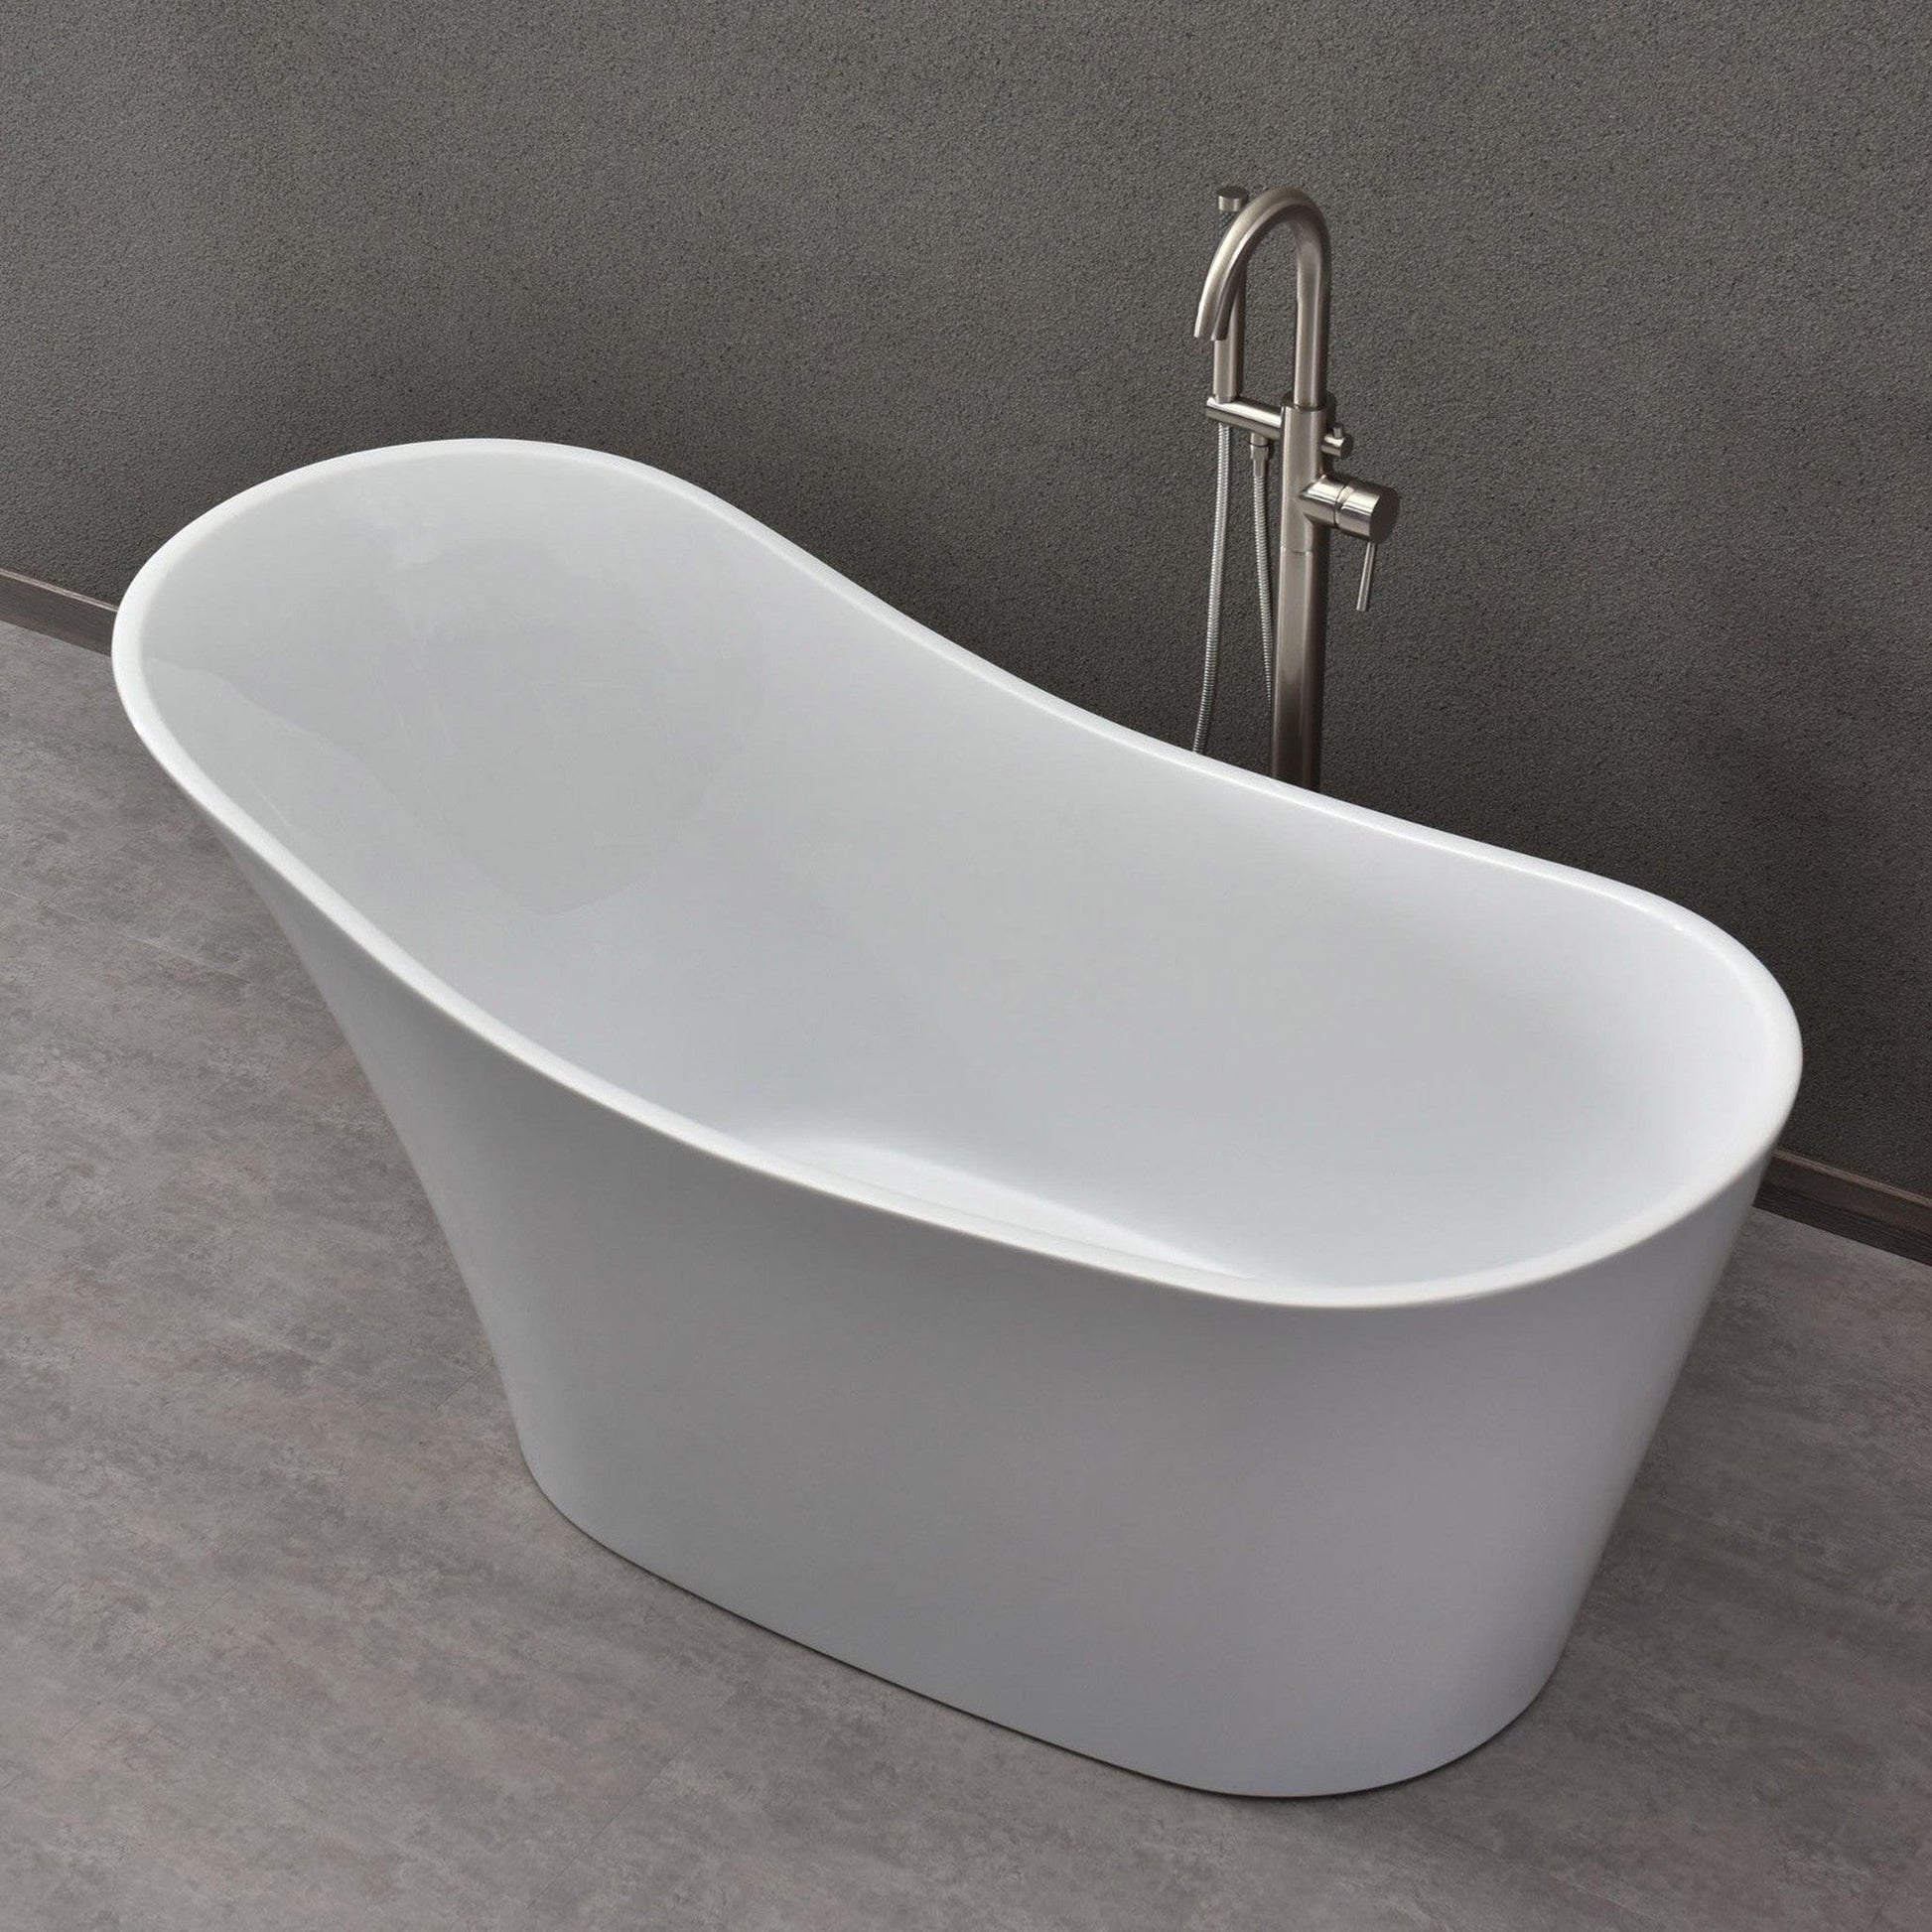 WoodBridge B0029 59" White Acrylic Freestanding Soaking Bathtub With Brushed Nickel Drain, Overflow, F0070BNVT Tub Filler and Caddy Tray